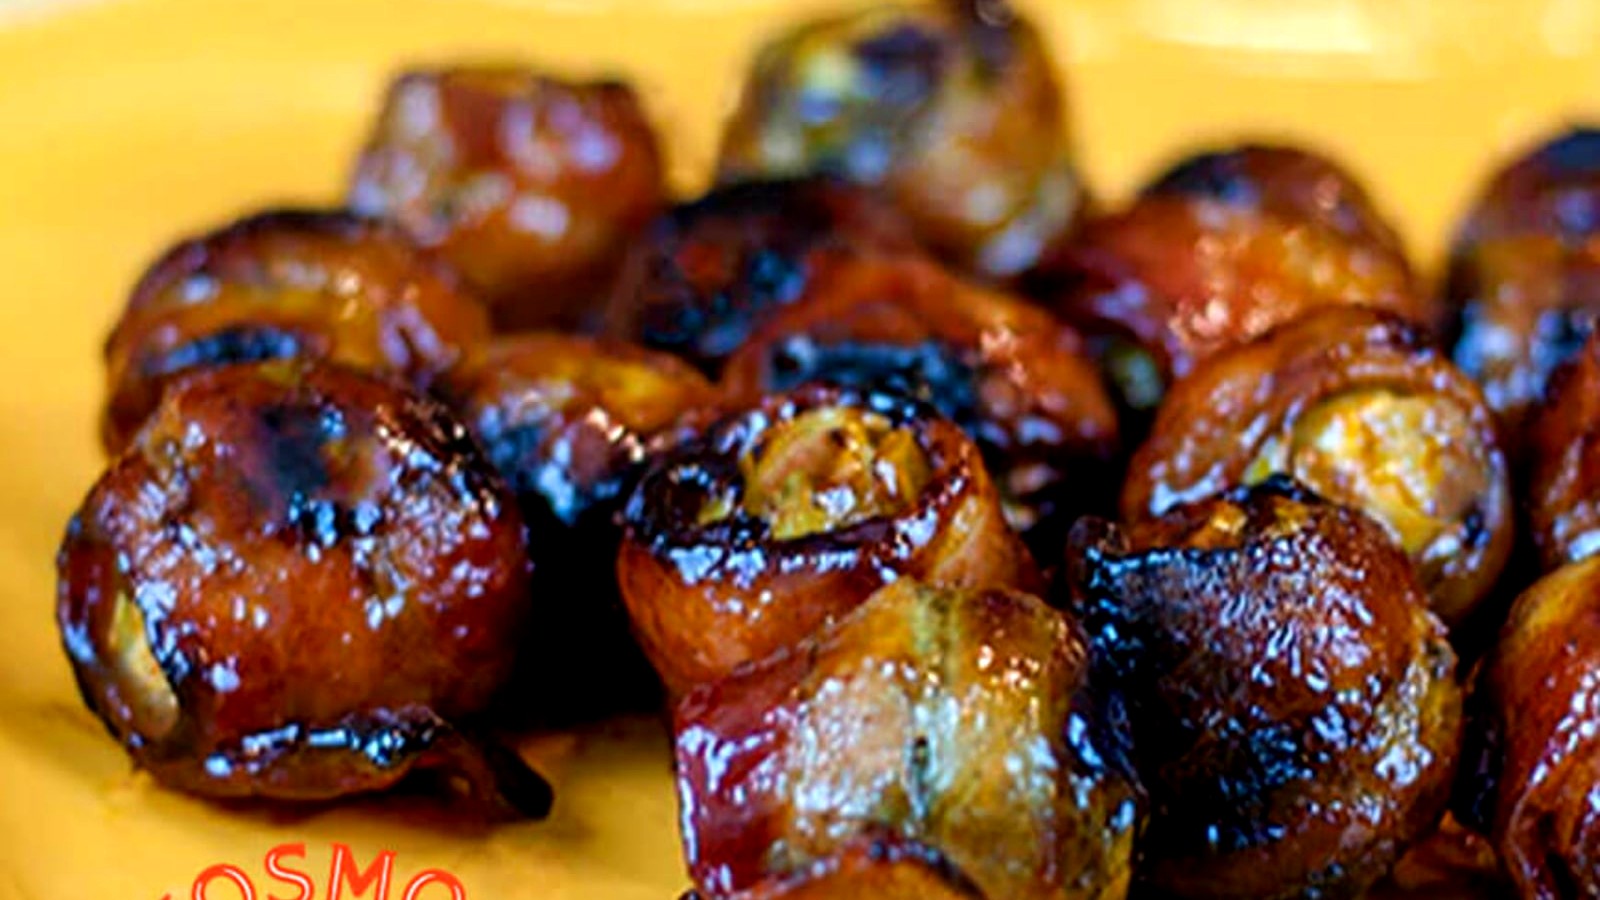 Image of Kosmo's Bacon-Wrapped & Grilled Brussels Sprouts with Sweet Apple Chipotle Glaze